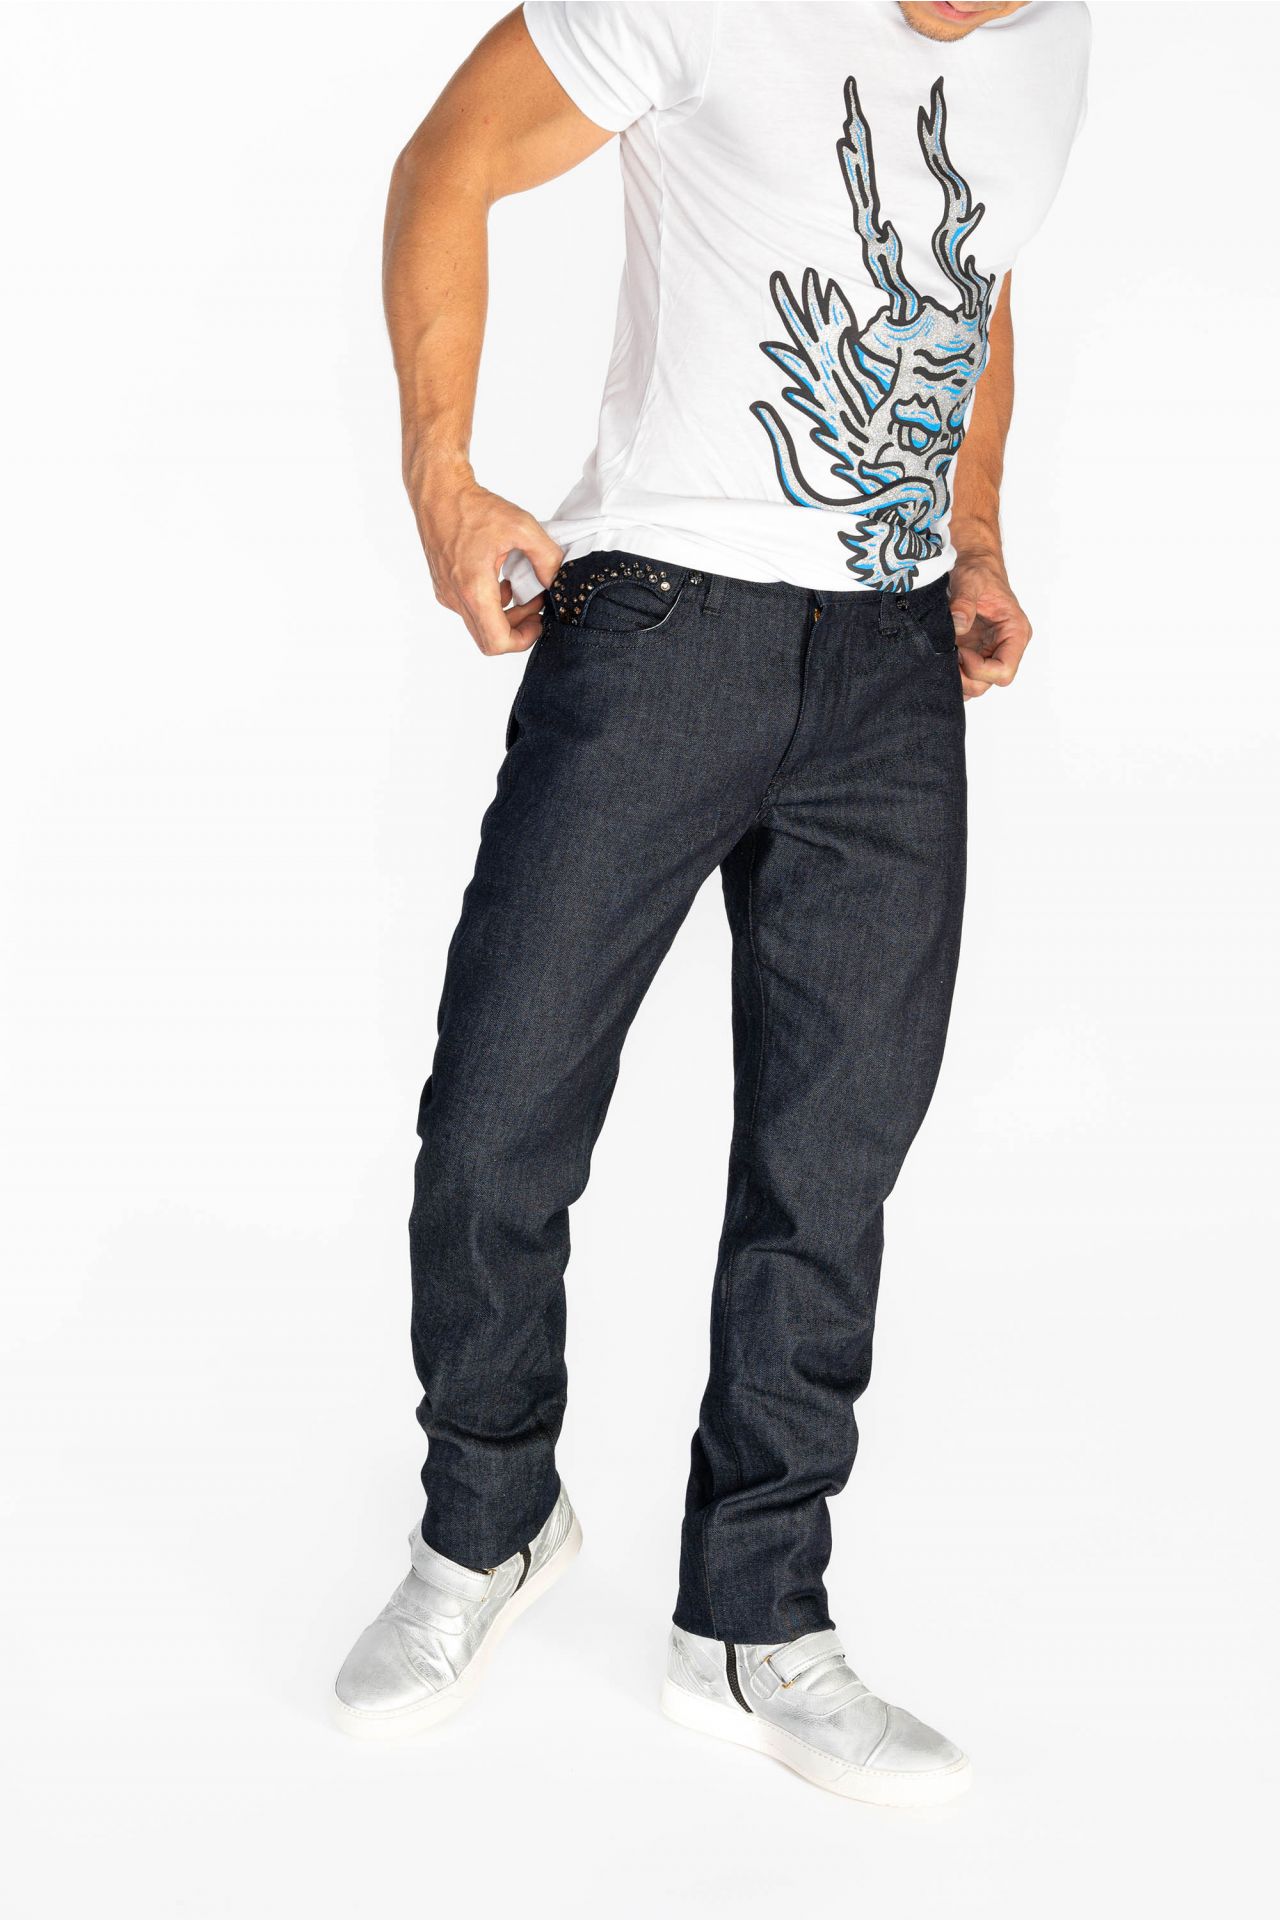 MENS RAW DENIM SLIM FIT KILLER FLAP JEANS WITH O.E. BLACK SCRIPT EMBROIDERY AND CRYSTALS